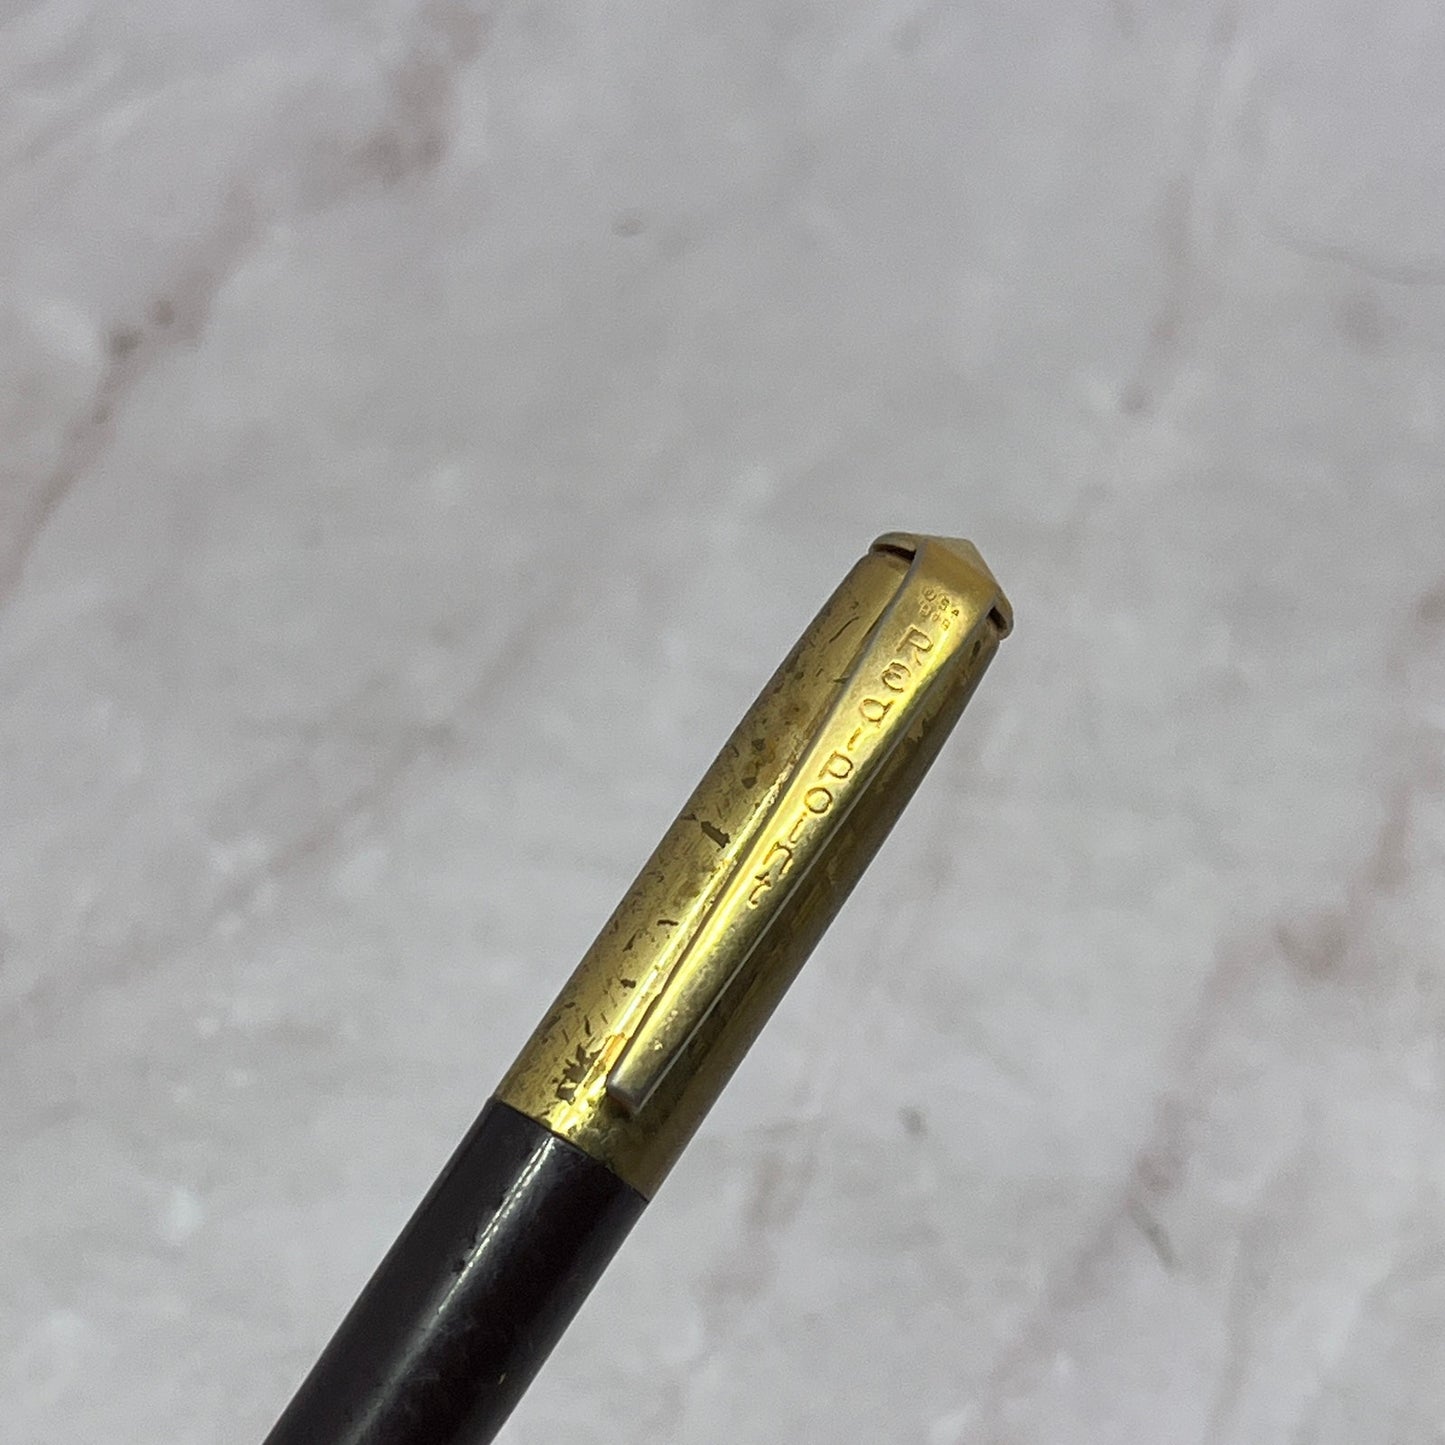 Redpoint Gold Tone Vintage Mechanical Pencil SB8-Y2